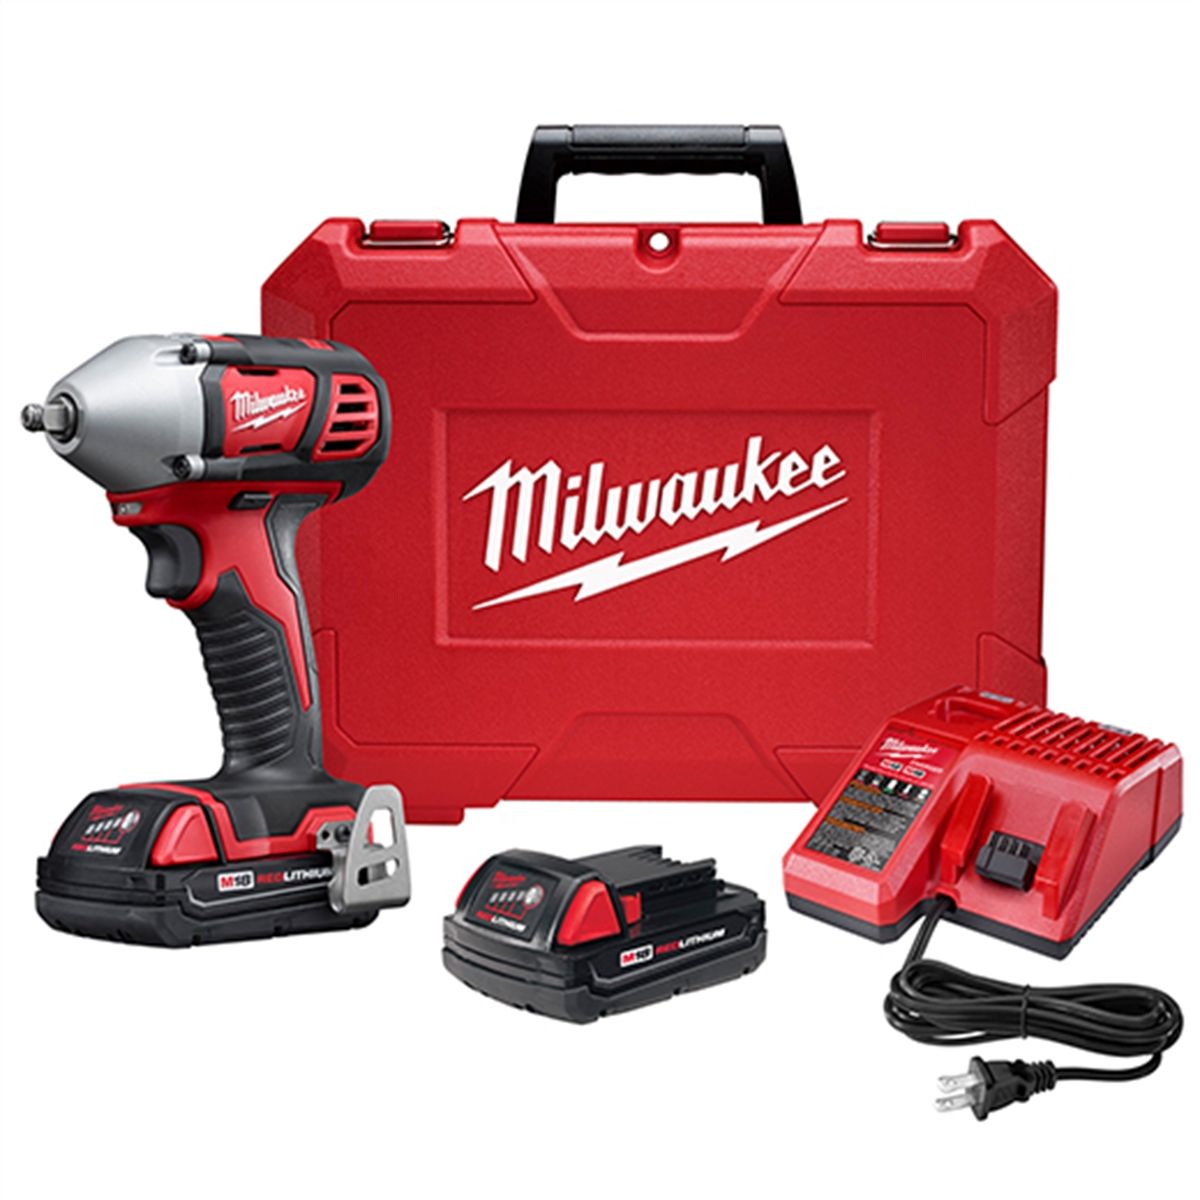 M18 3/8" Impact Wrench w/ compact batteries